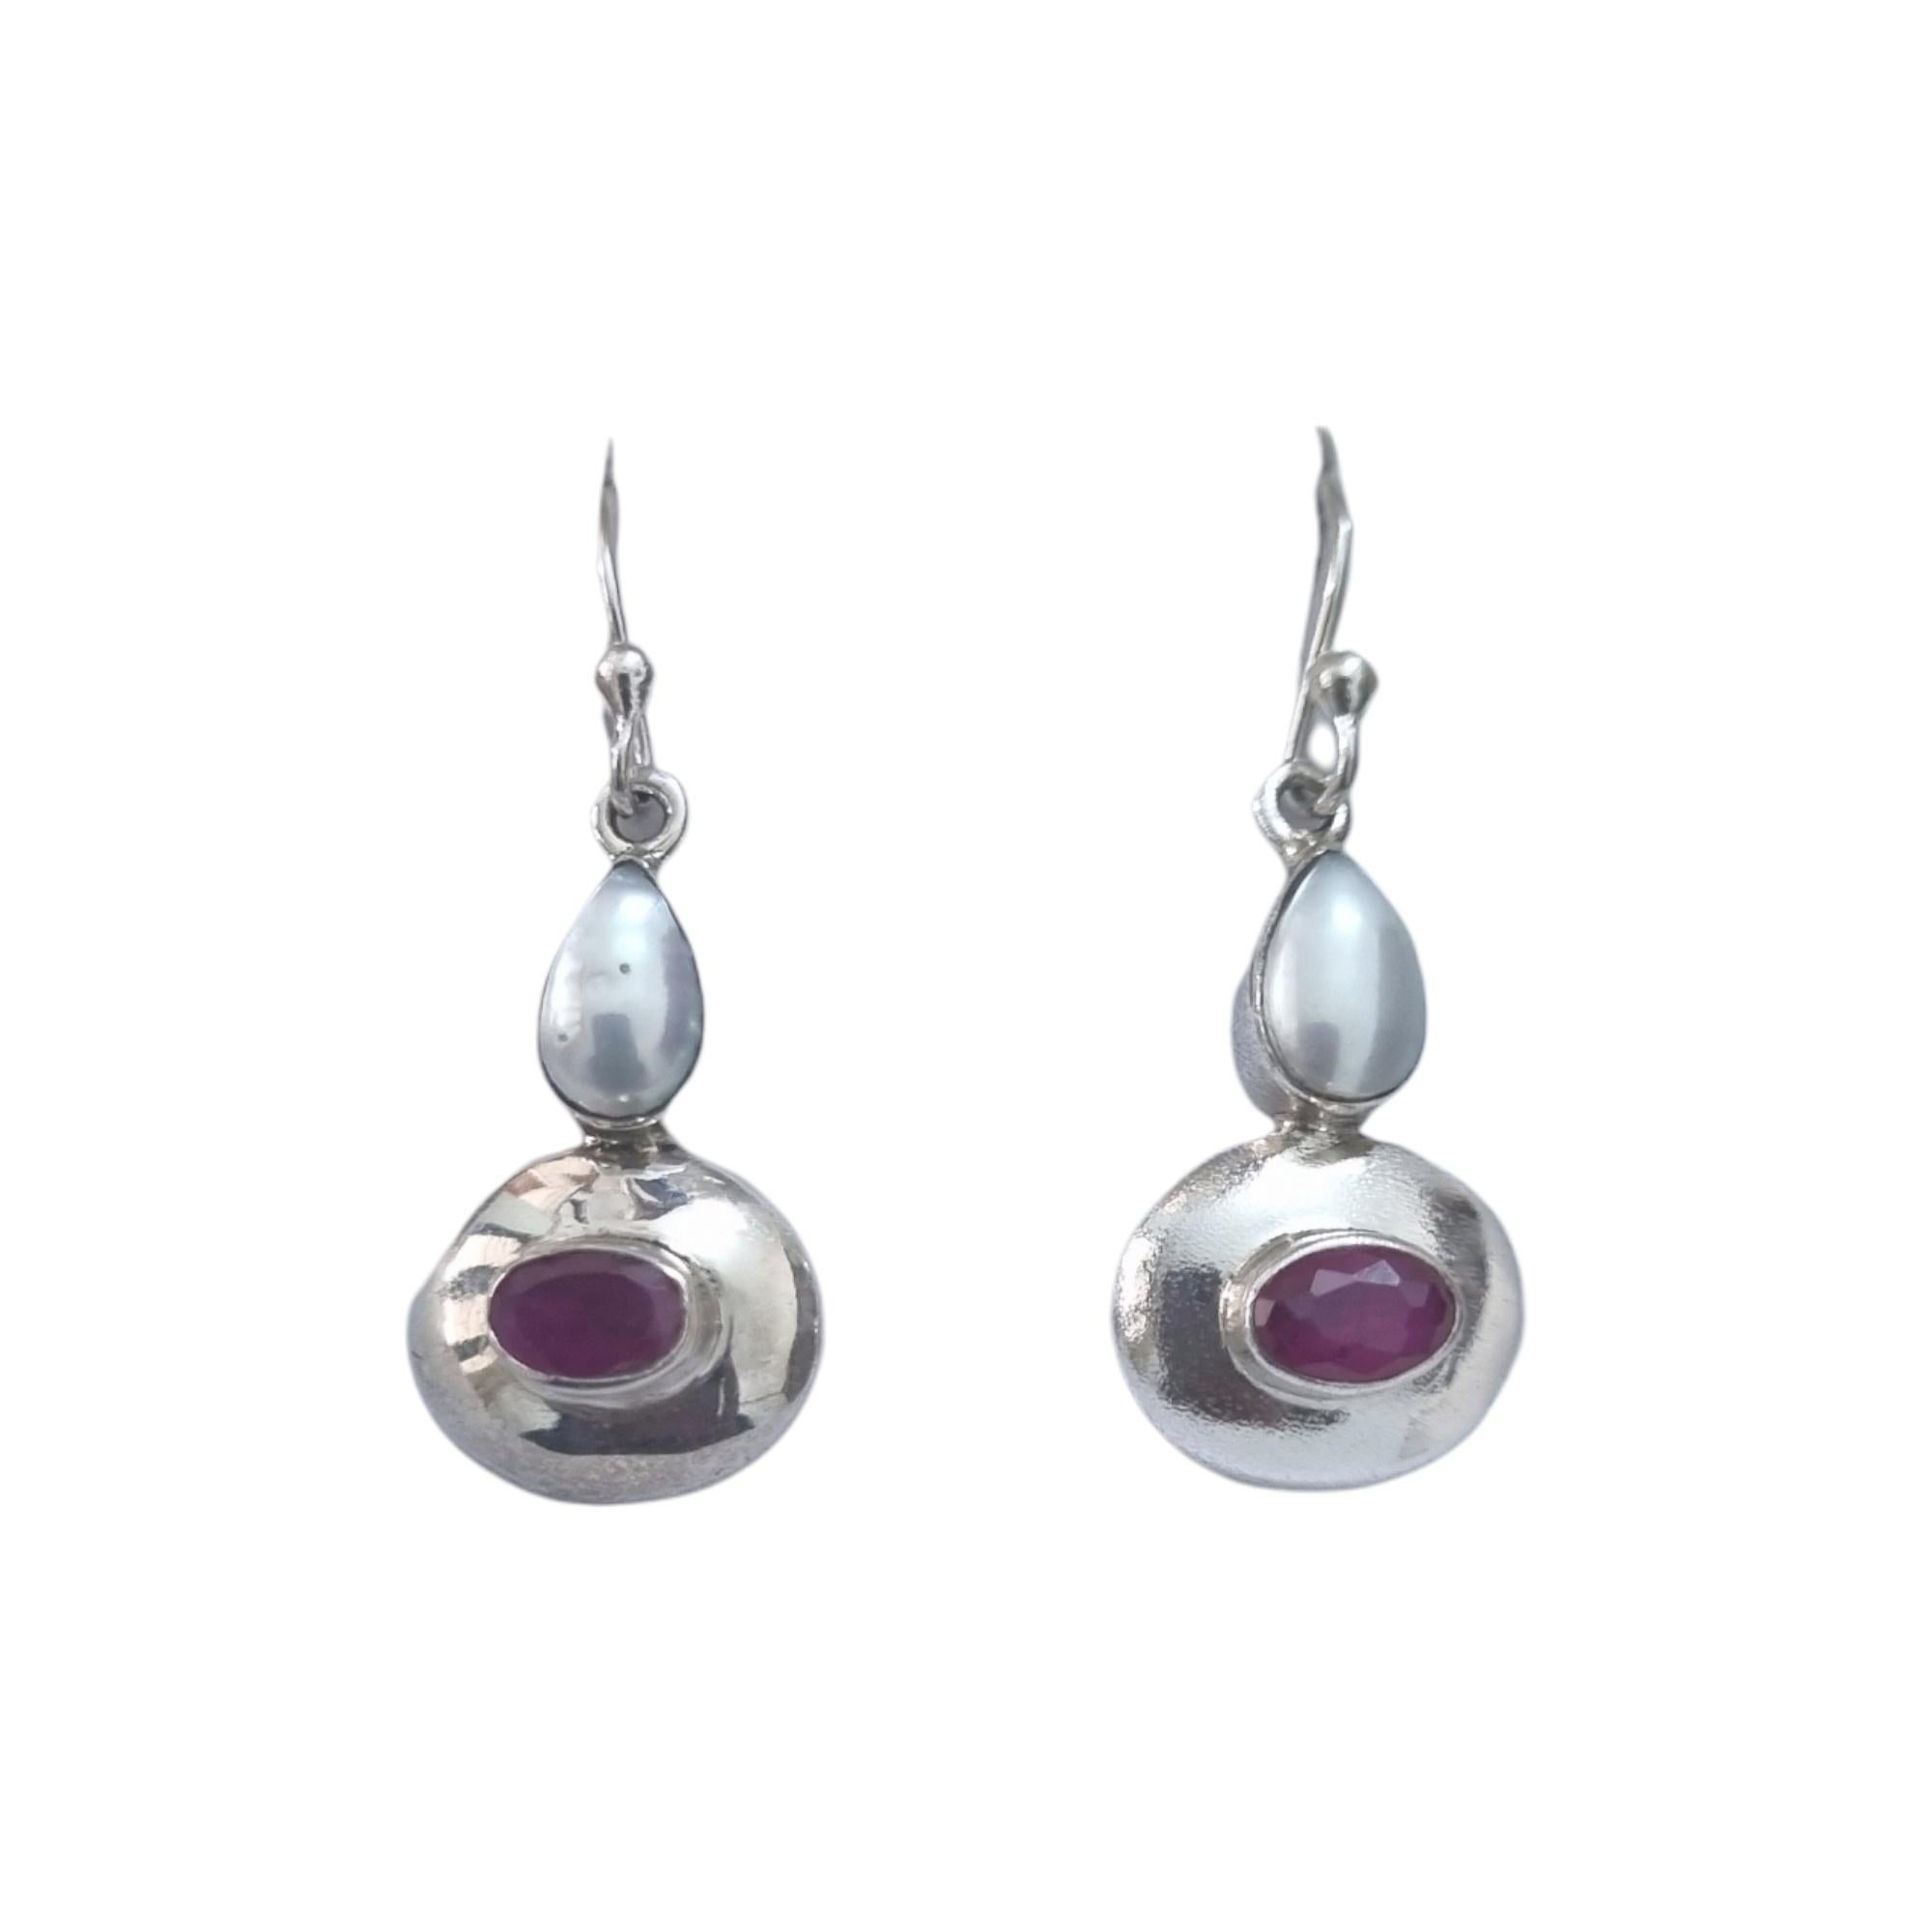 Metal - Sterling silver
Gross Weight - 3.40 Grams
Gemstones - Natural Rubies & Freshwater Pearls

Introducing our exquisite oval cut ruby and pear-shaped pearl earrings in stunning sterling silver. Elevate your style with this timeless combination